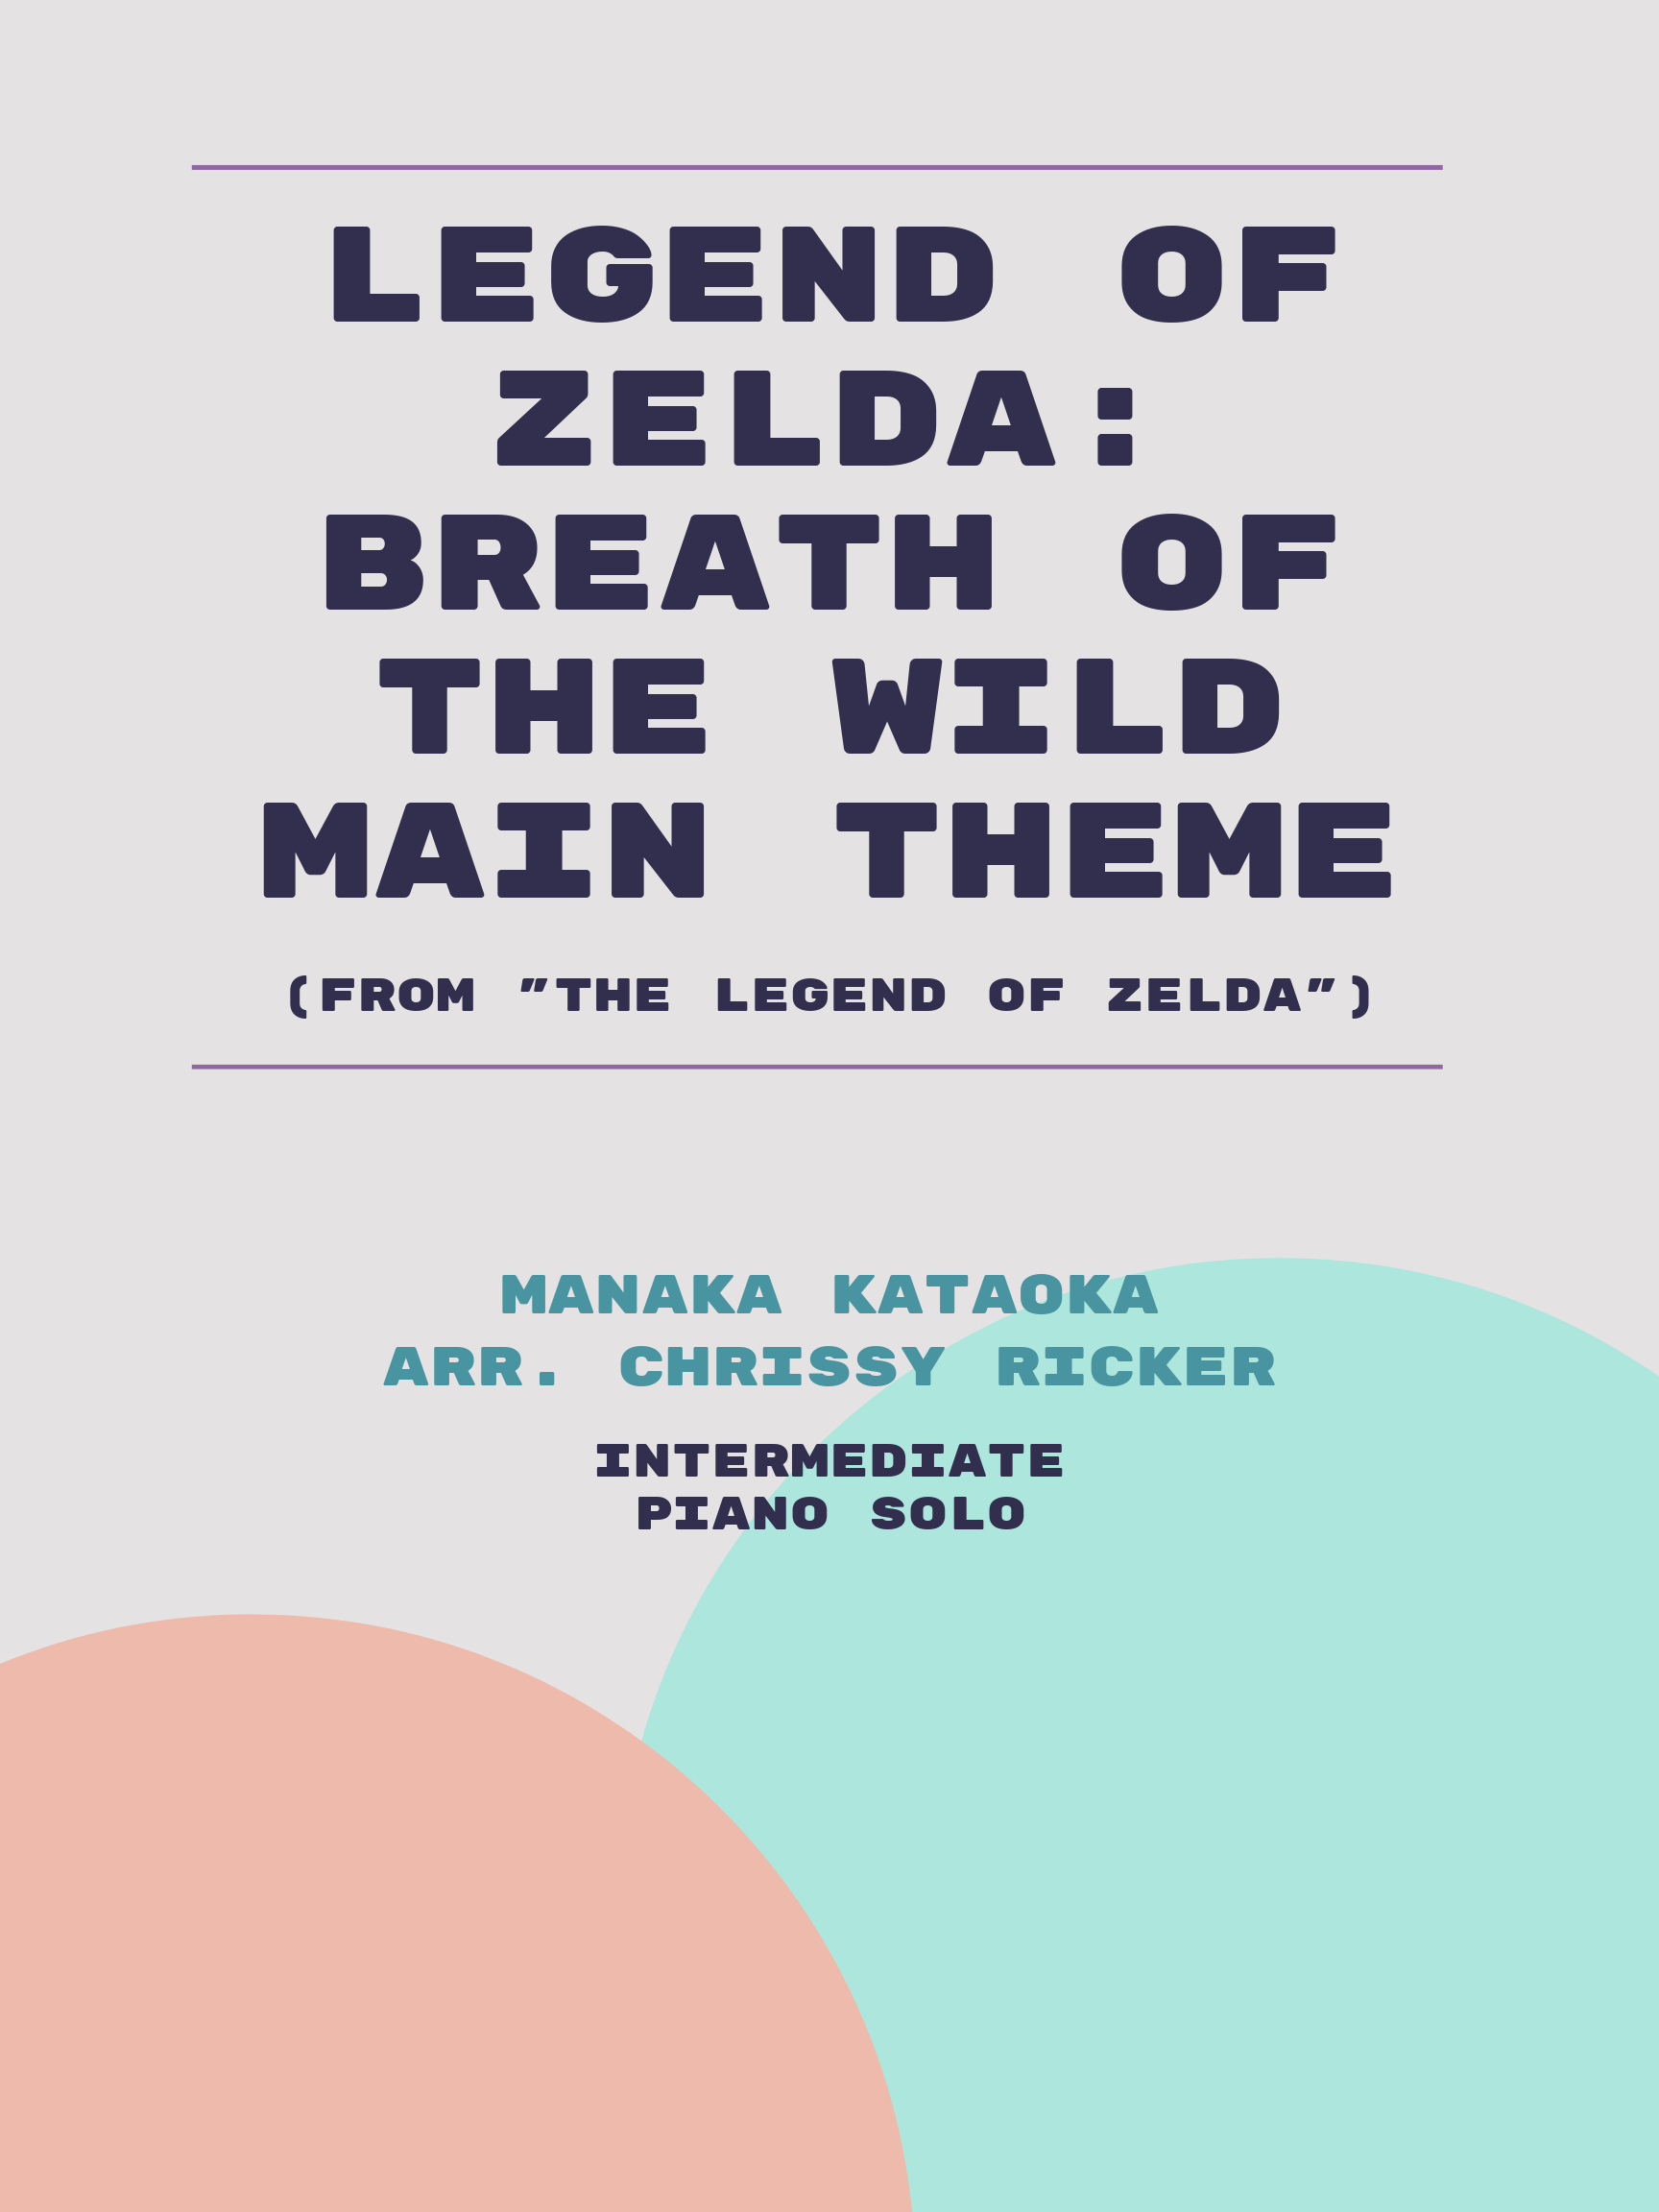 Legend of Zelda: Breath of the Wild Main Theme Sample Page